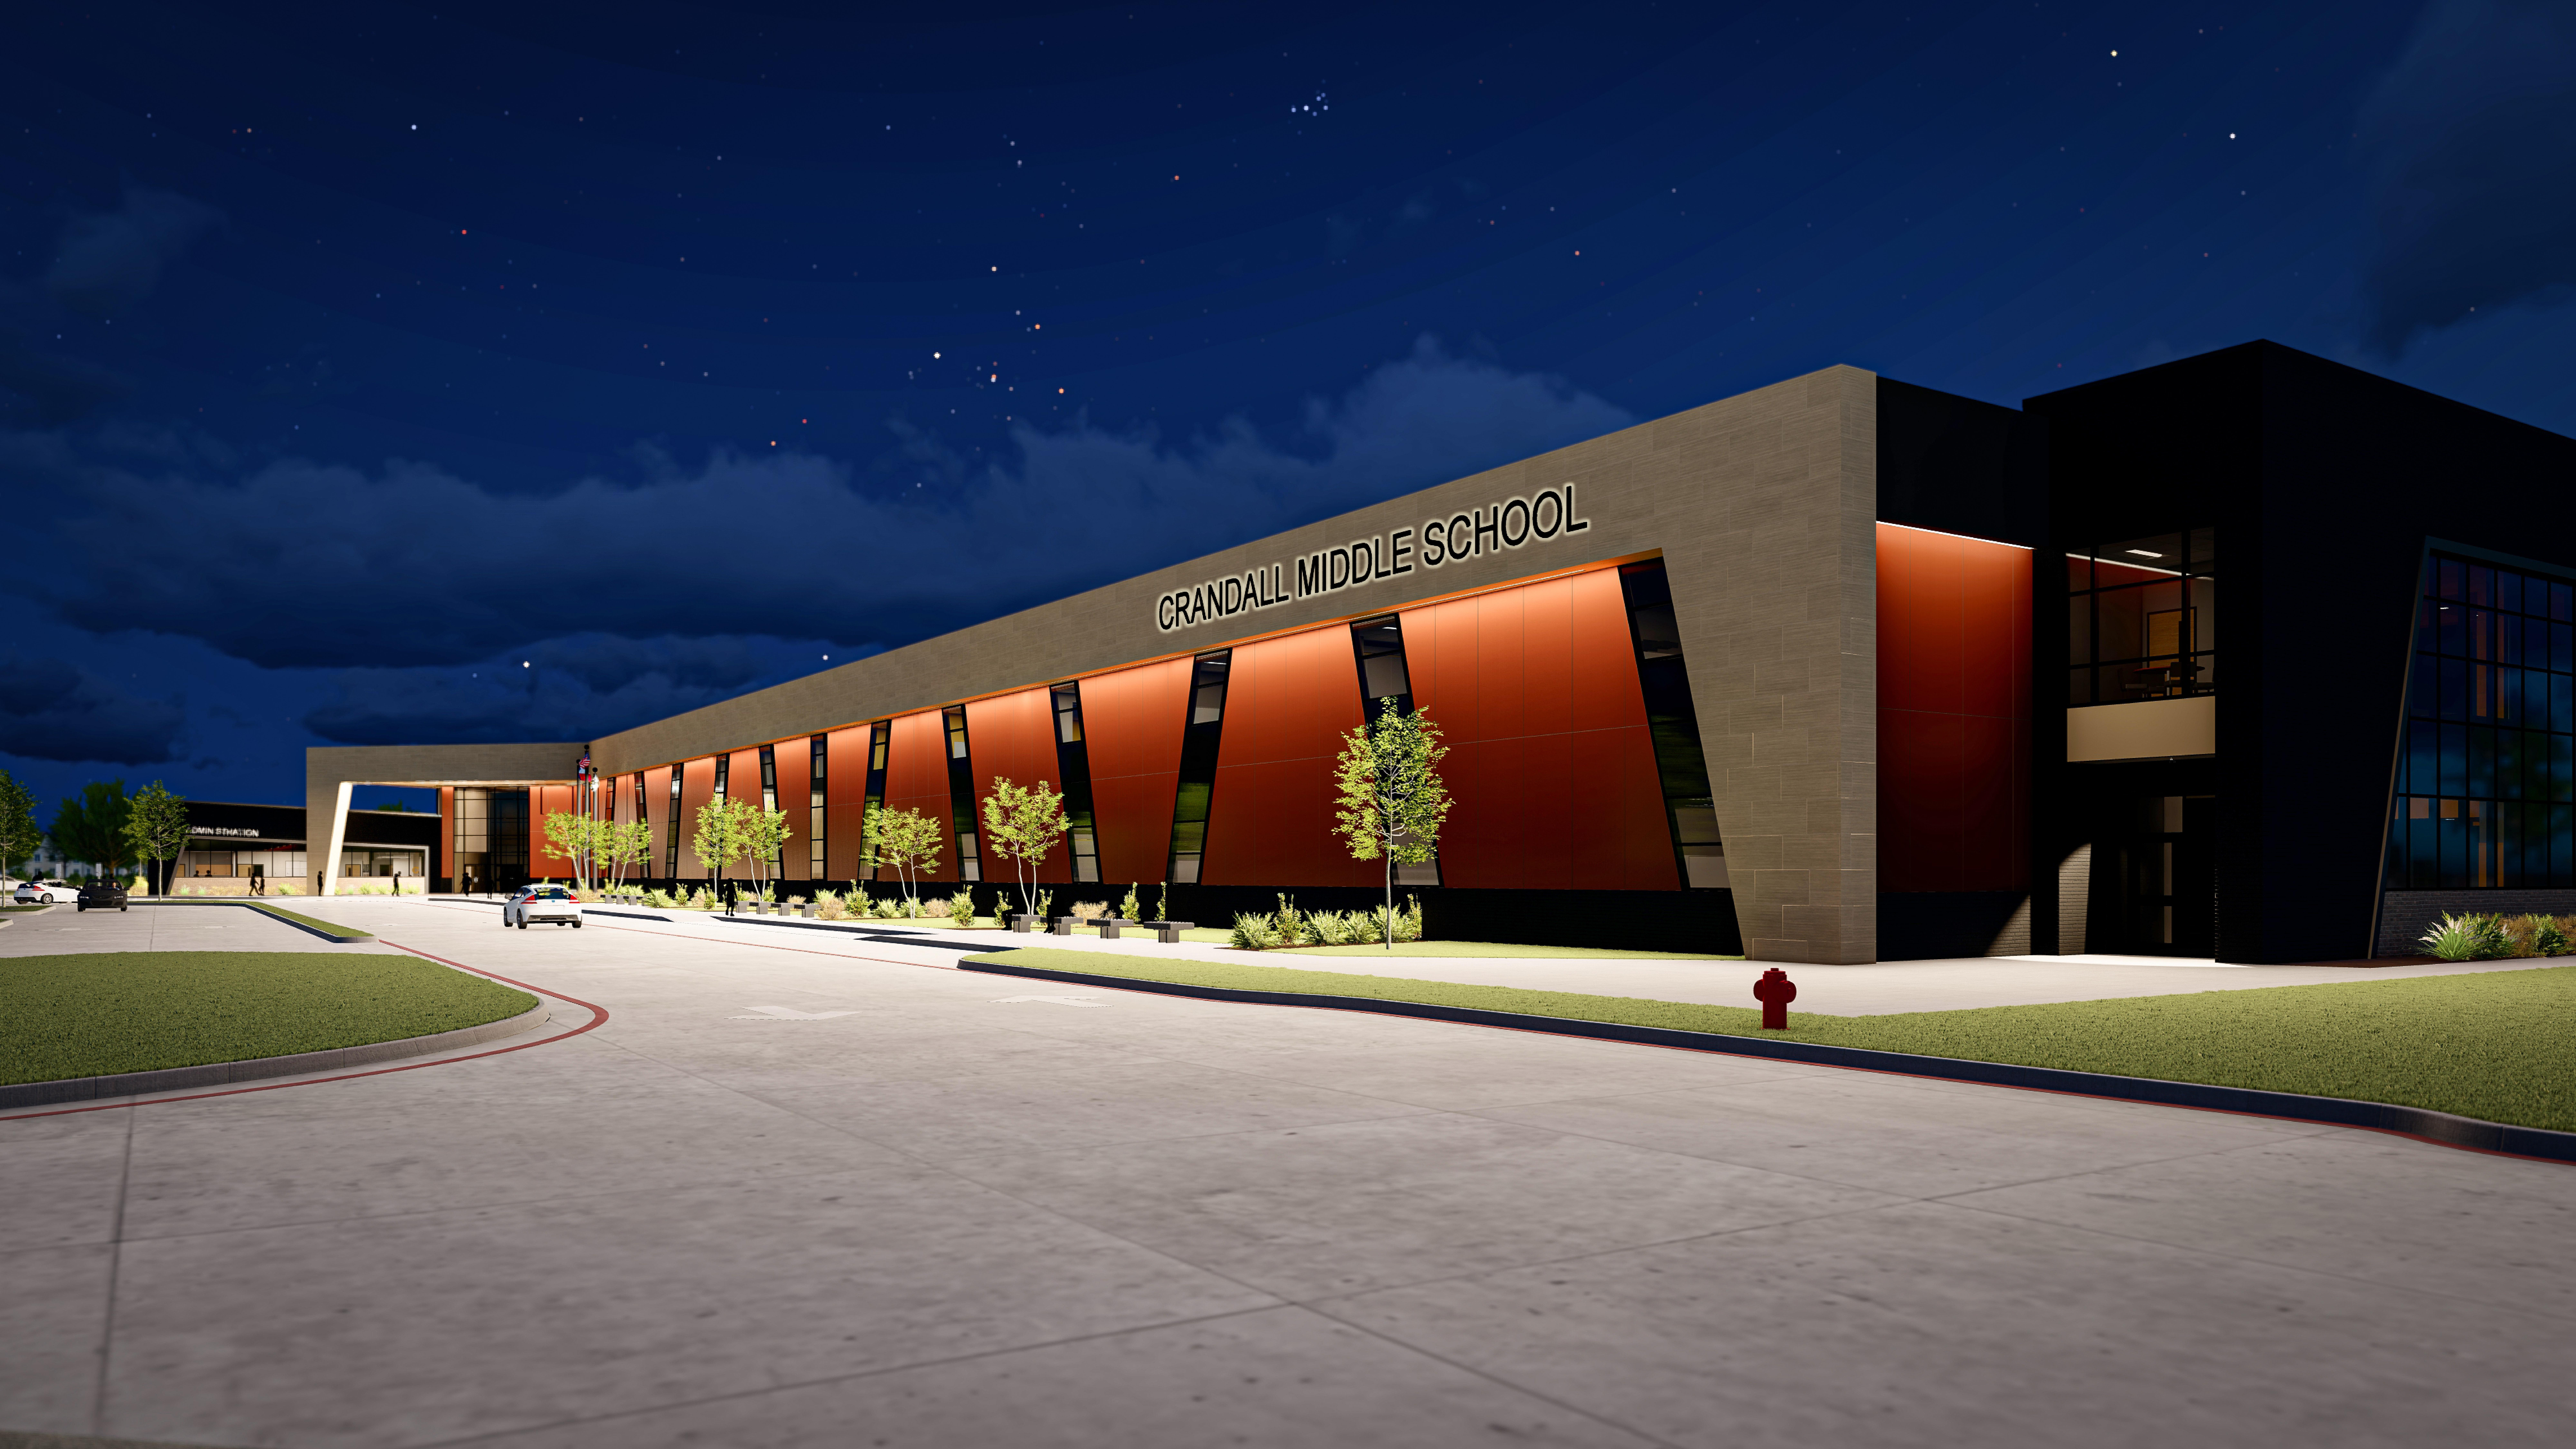 A Look into new Crandall Middle School coming to Heartland Community